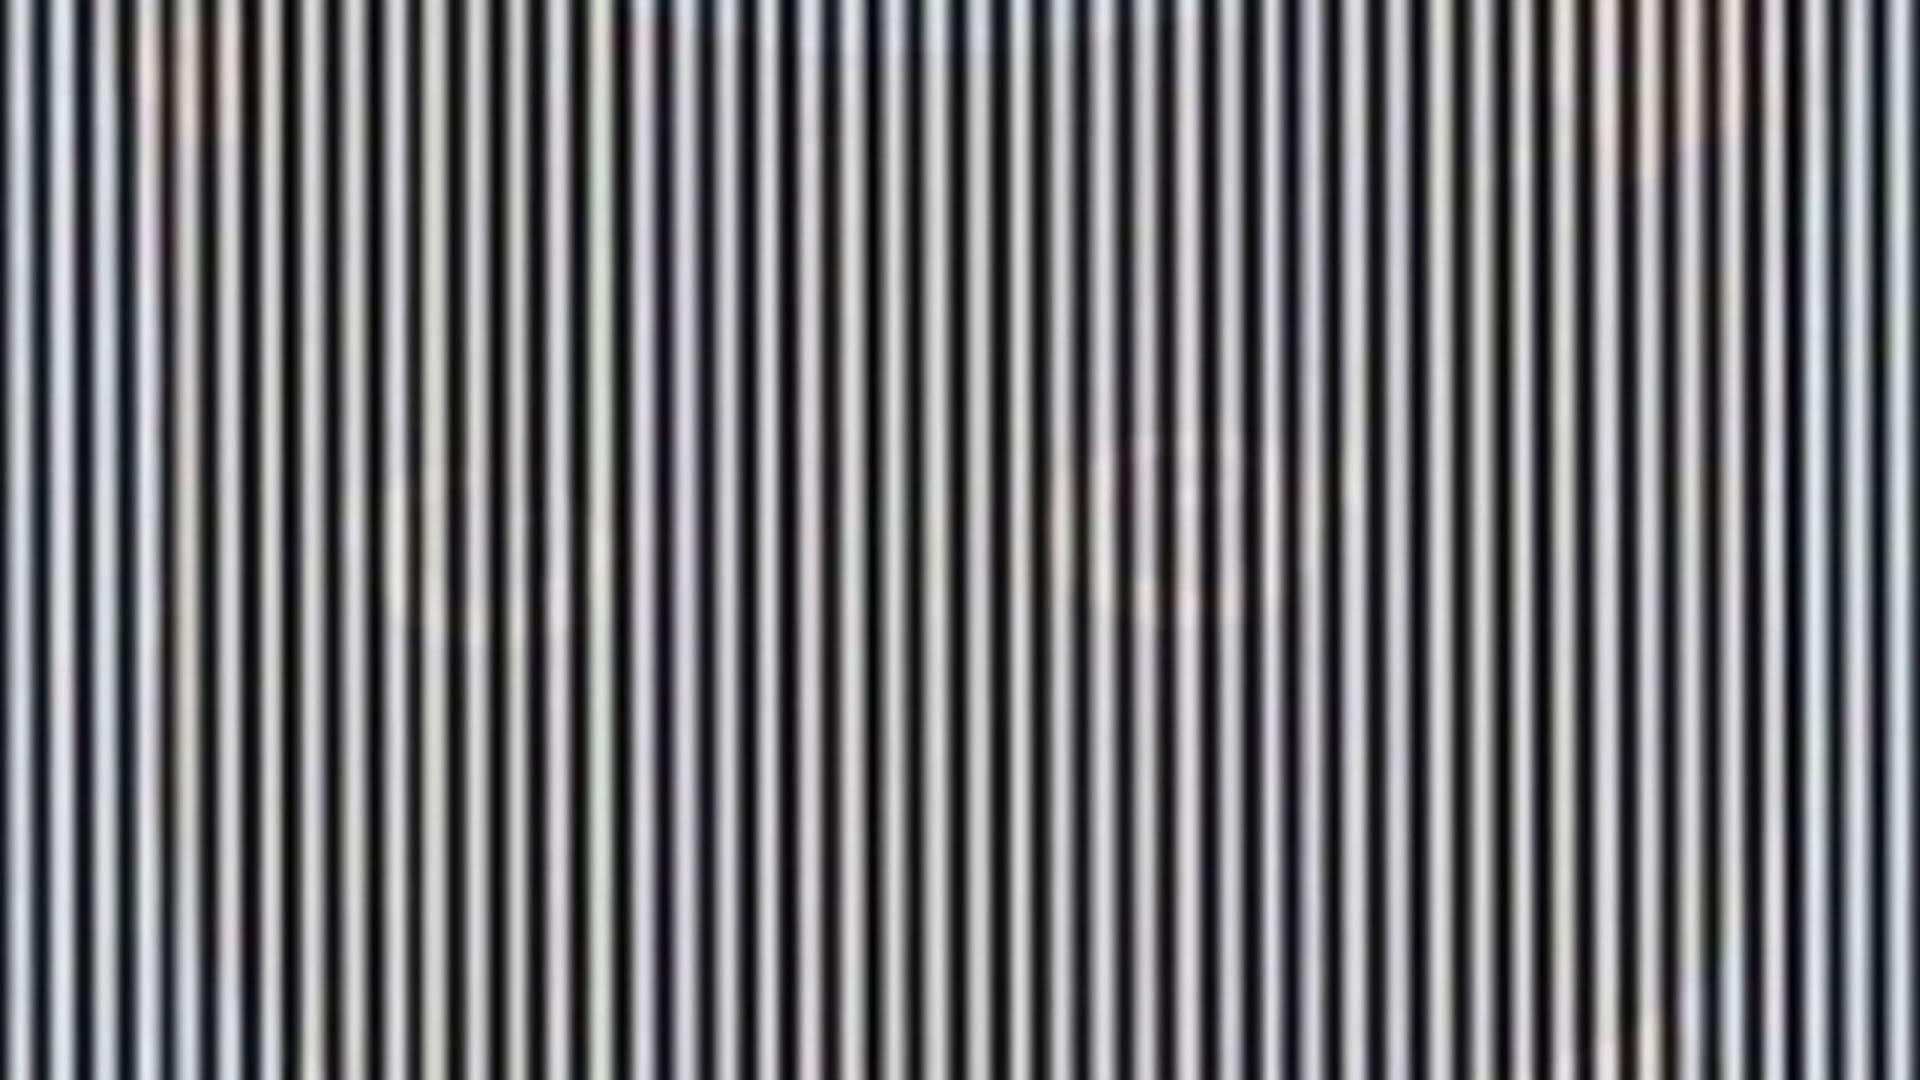 If you can spot the animal hidden in this optical illusion within 5 seconds then you're a genius